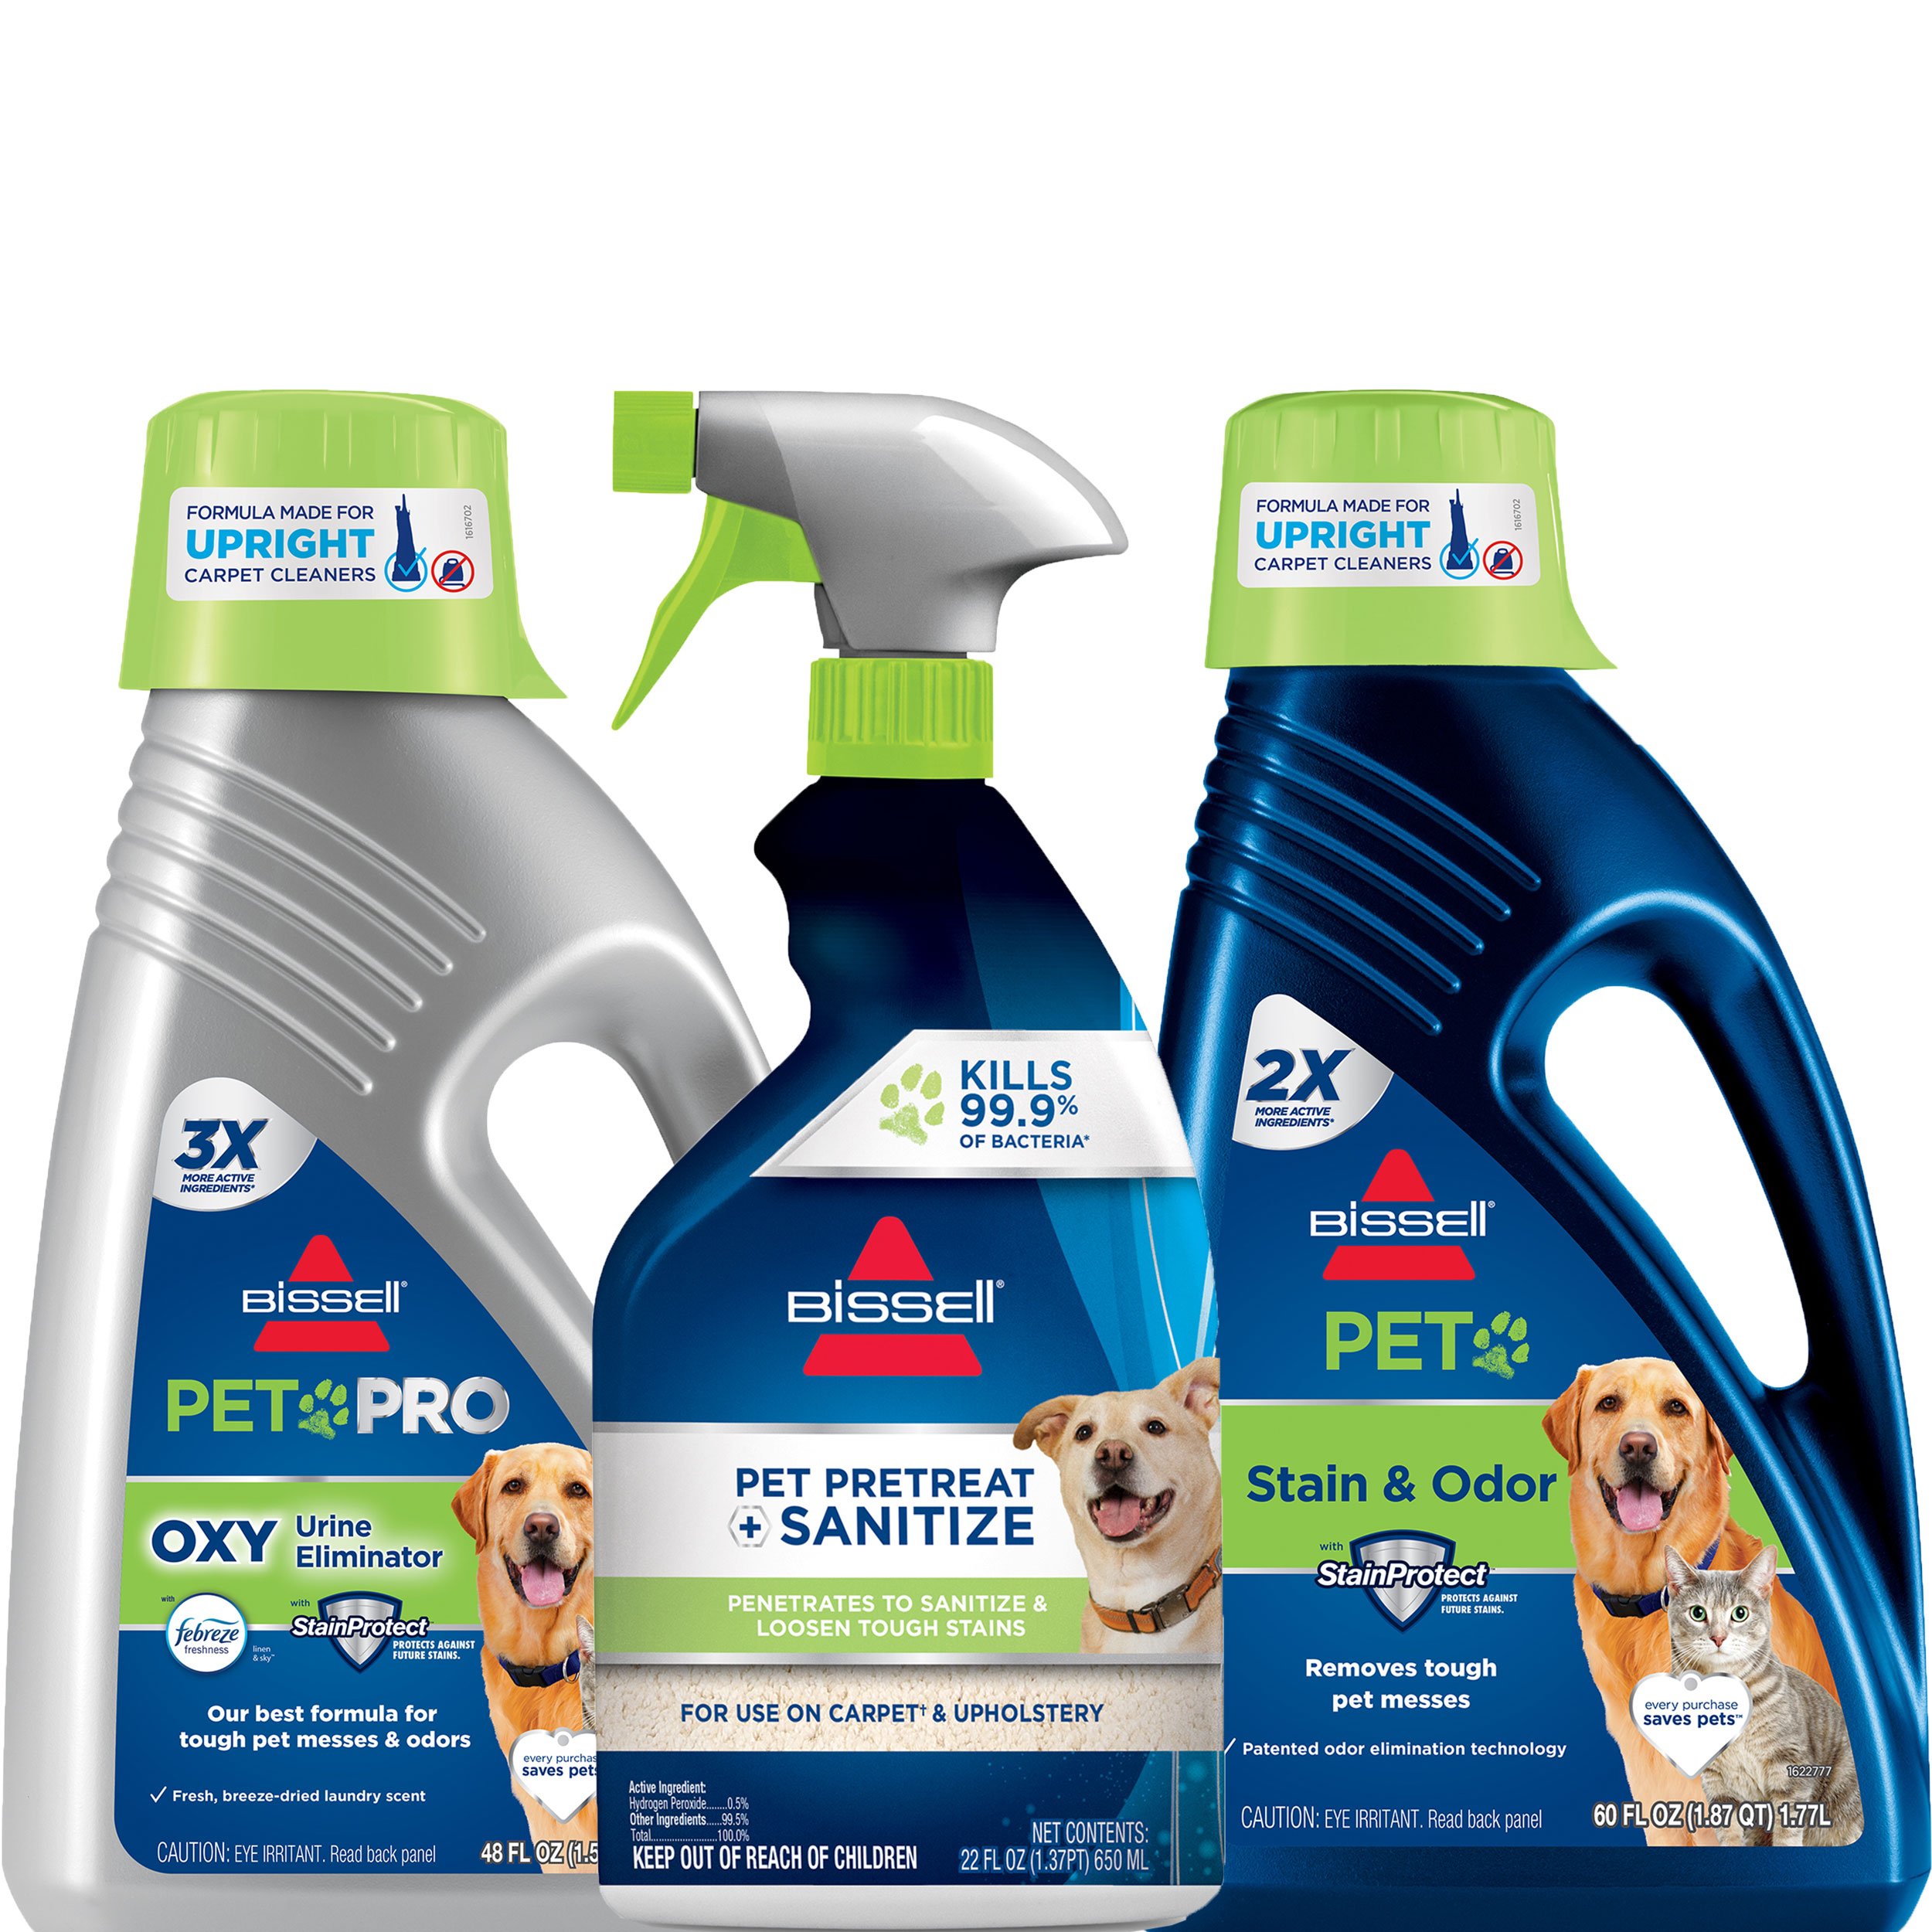 Cleaning and Disinfecting Pet Supplies